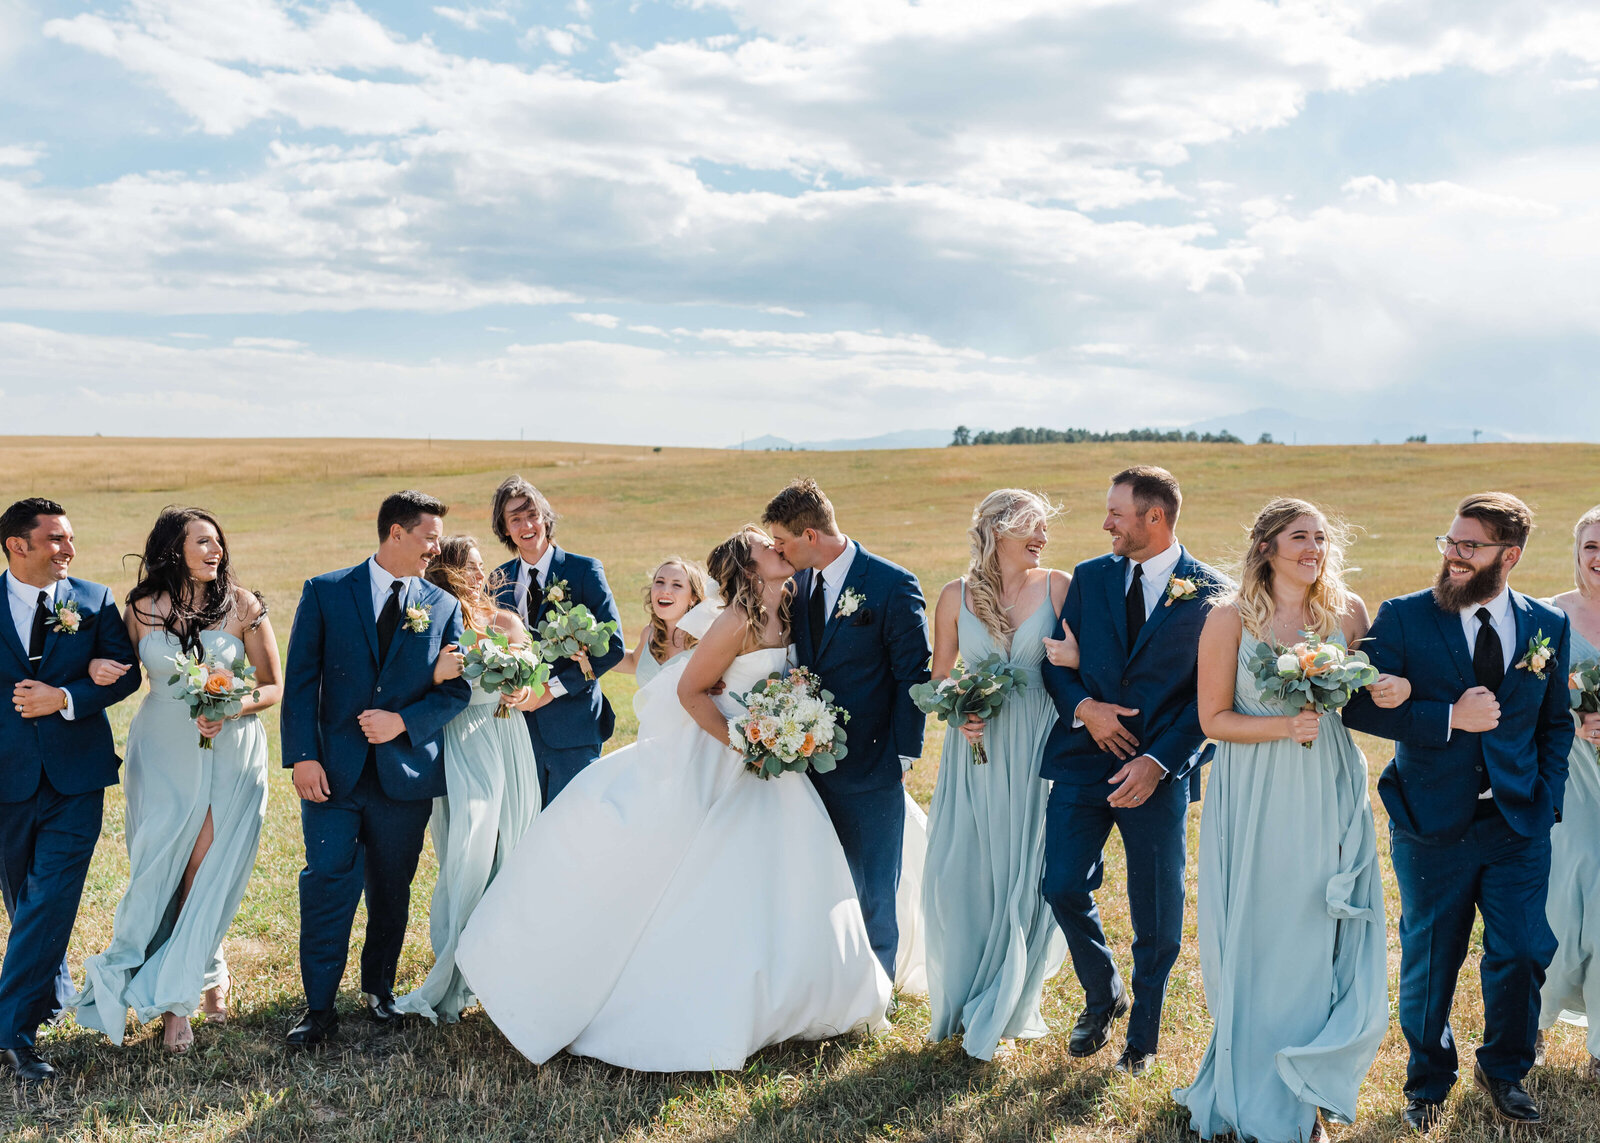 A large bridal party walk together and laugh in an open field after the wedding ceremony of their best friends